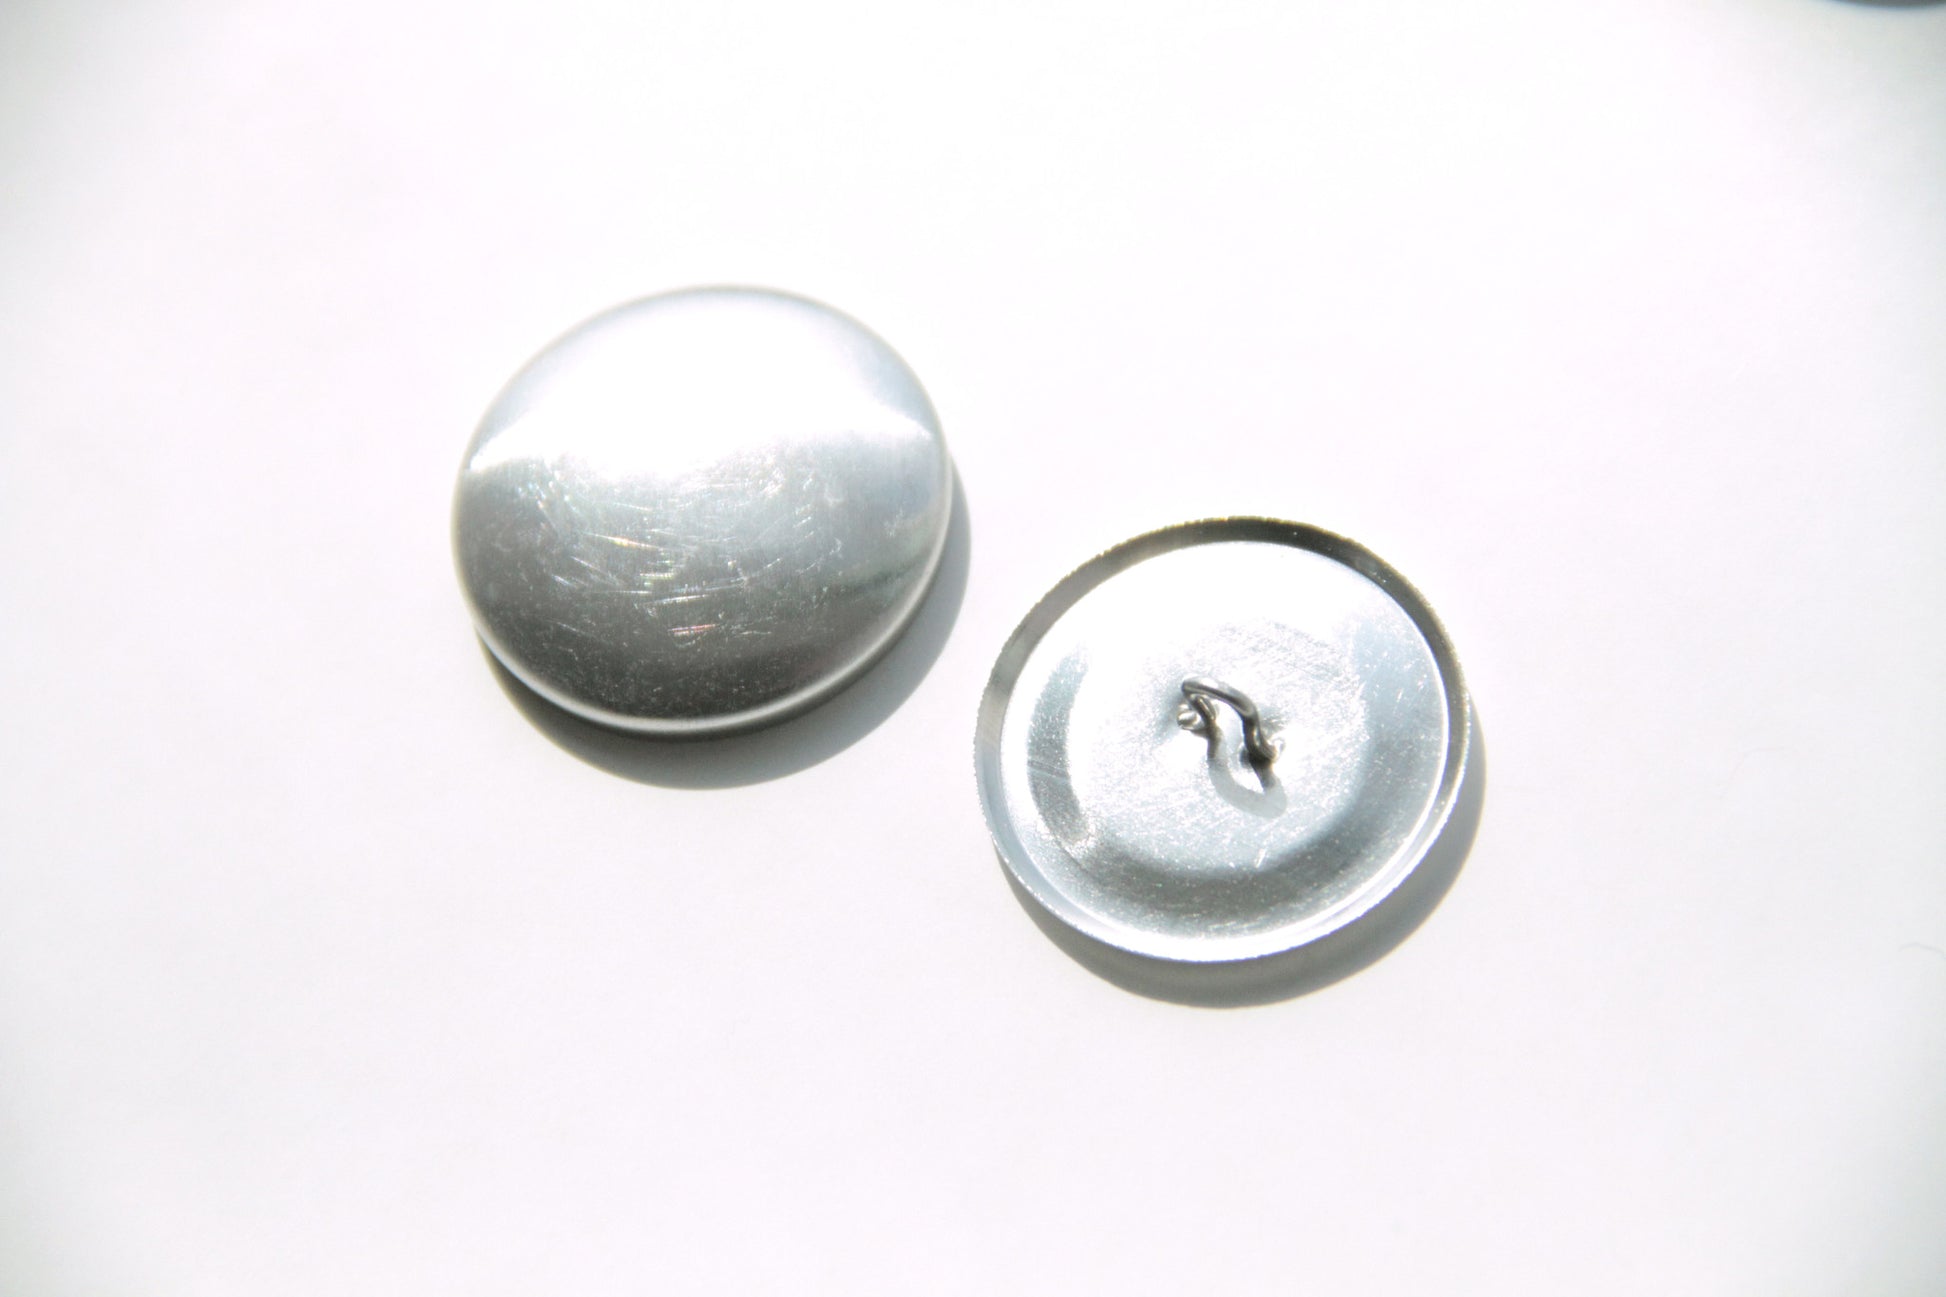 Cover Button - 27mm, Round, Wire Back - KEY Handmade
 - 2